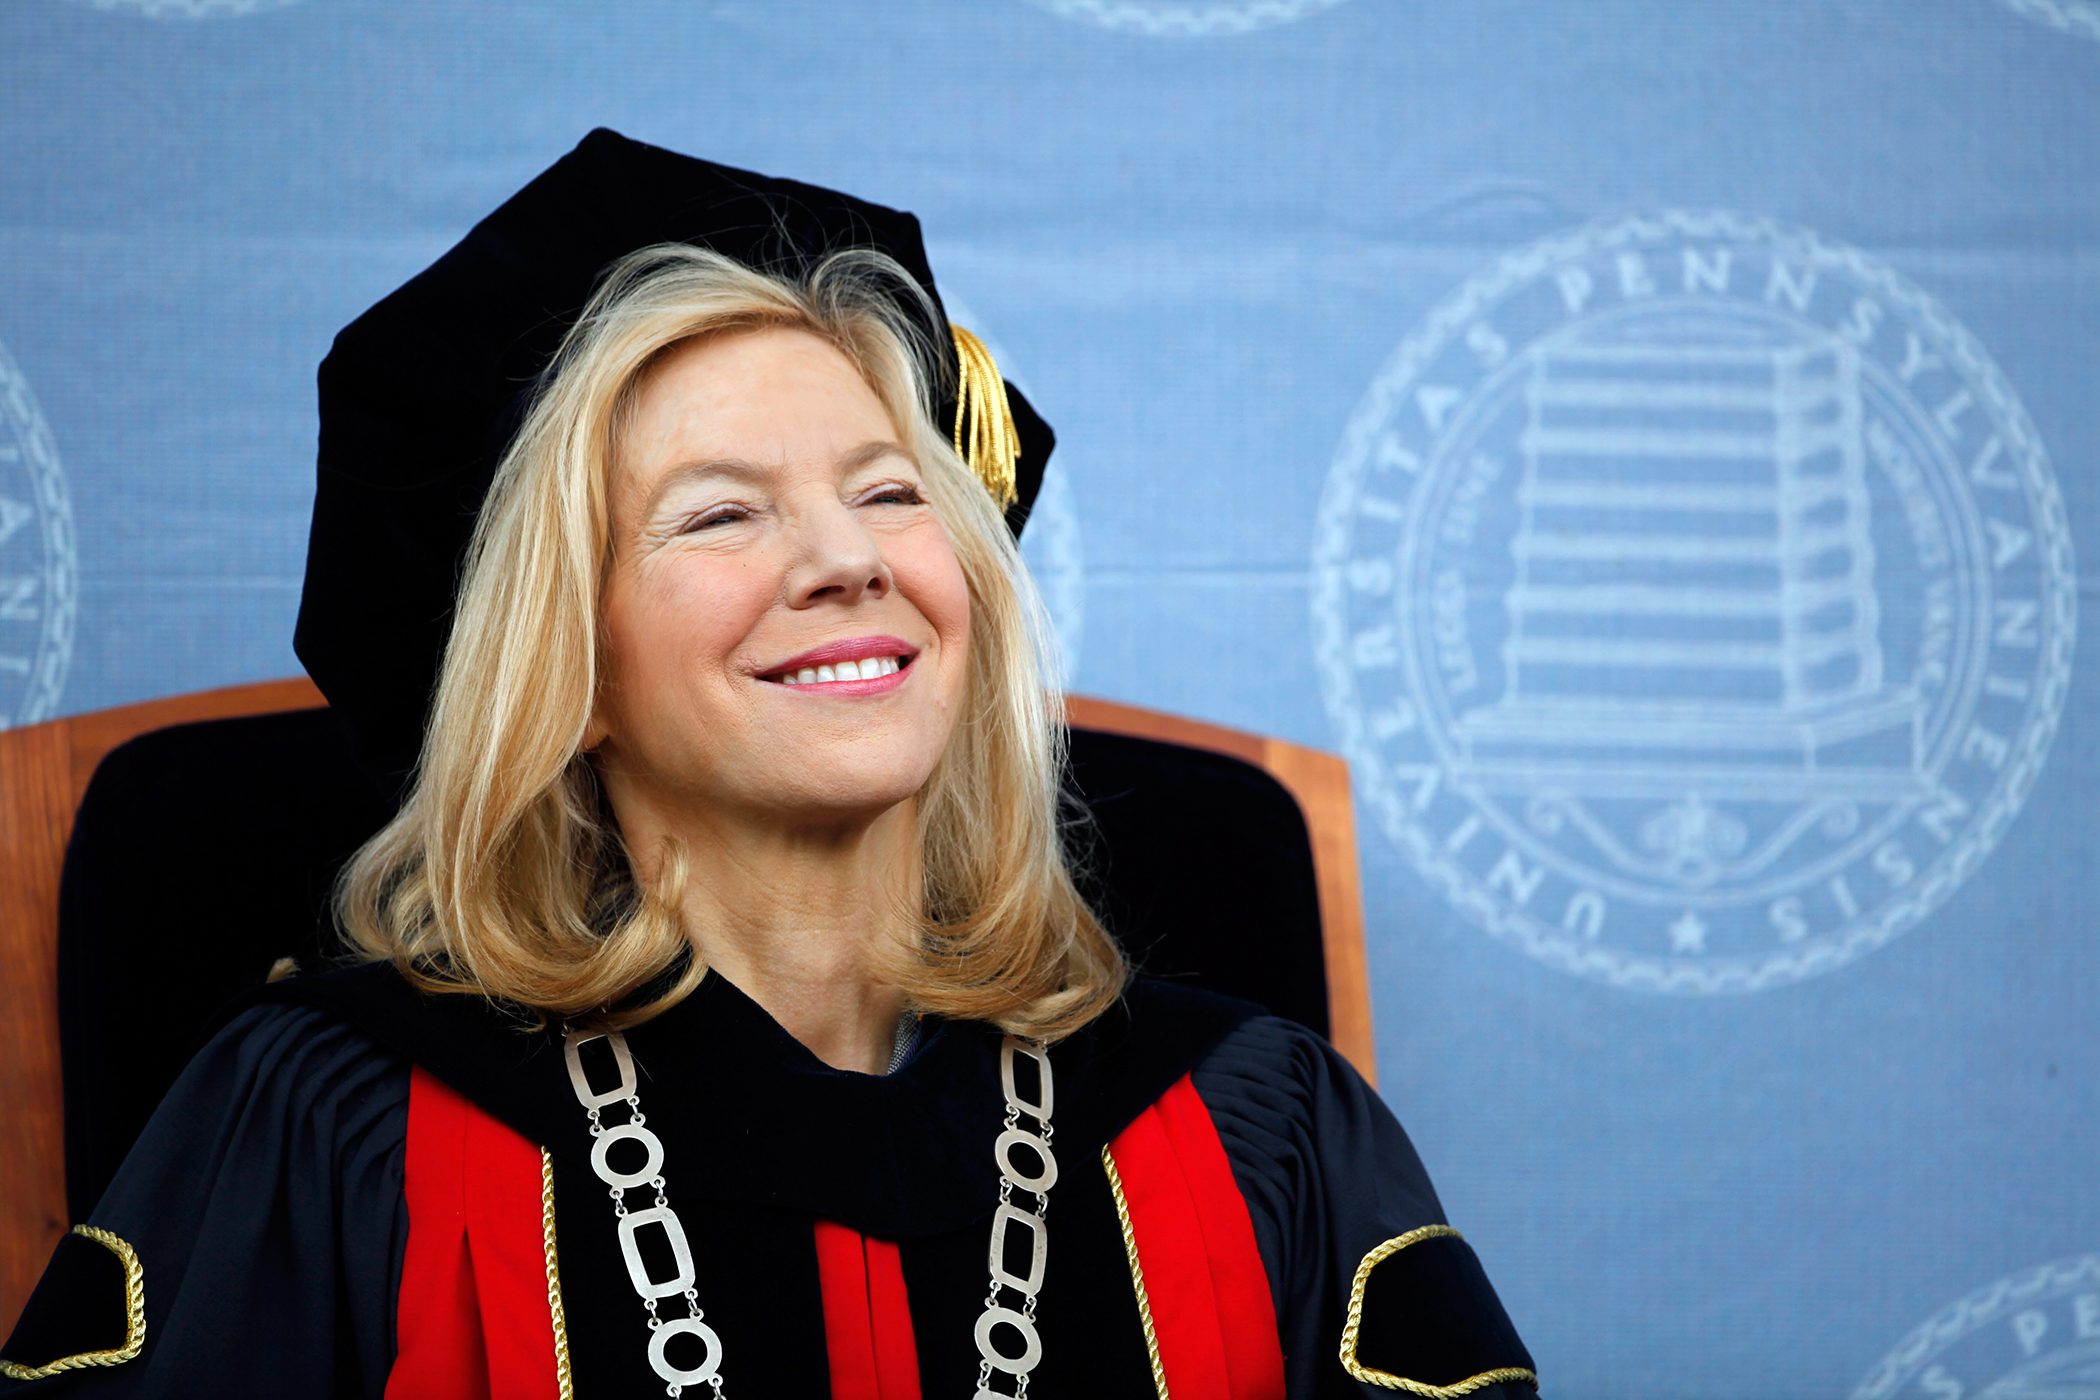 President of the University of Pennsylvania Amy Gutmann during commencement in Philadelphia, Monday, May 18, 2009